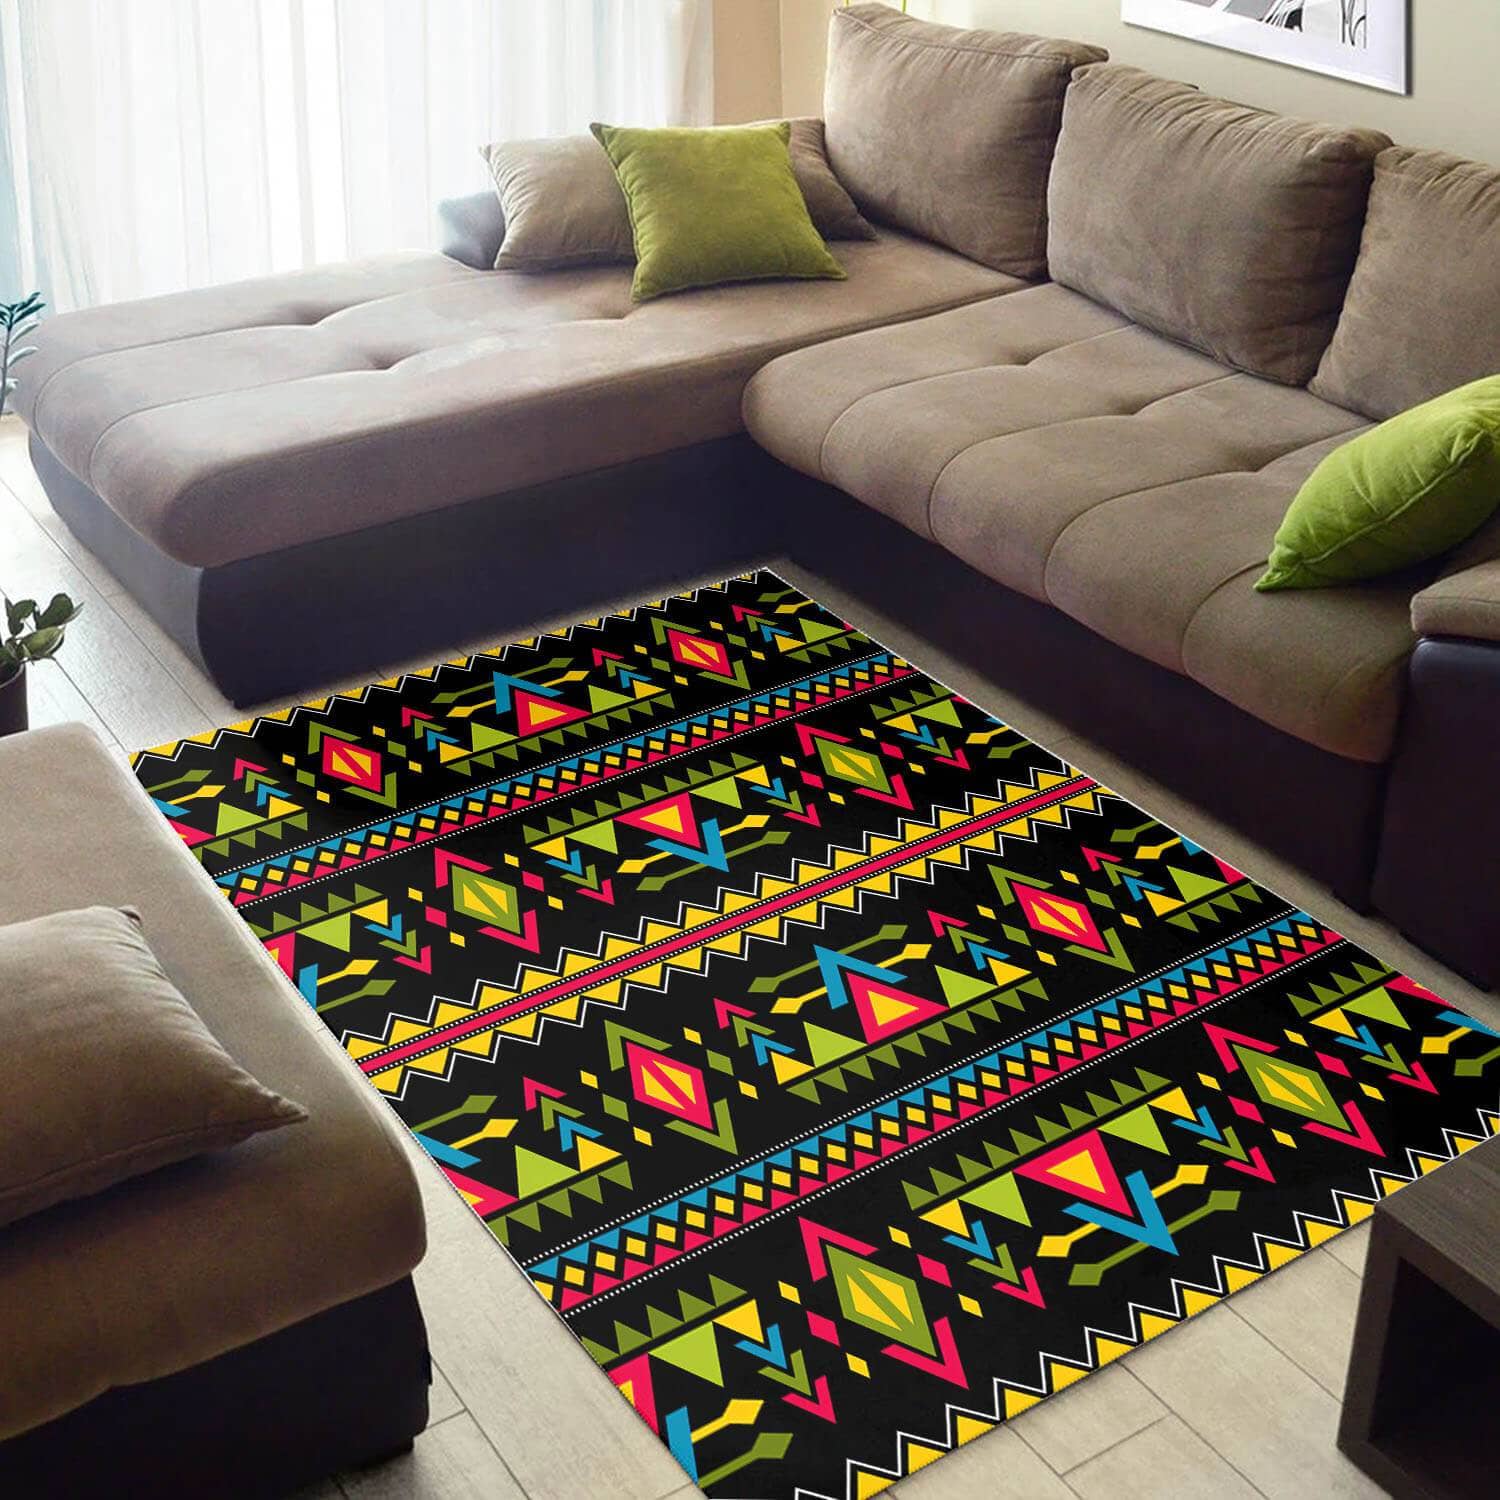 Nice African American Art Afrocentric Pattern Design Floor Carpet Themed Home Rug